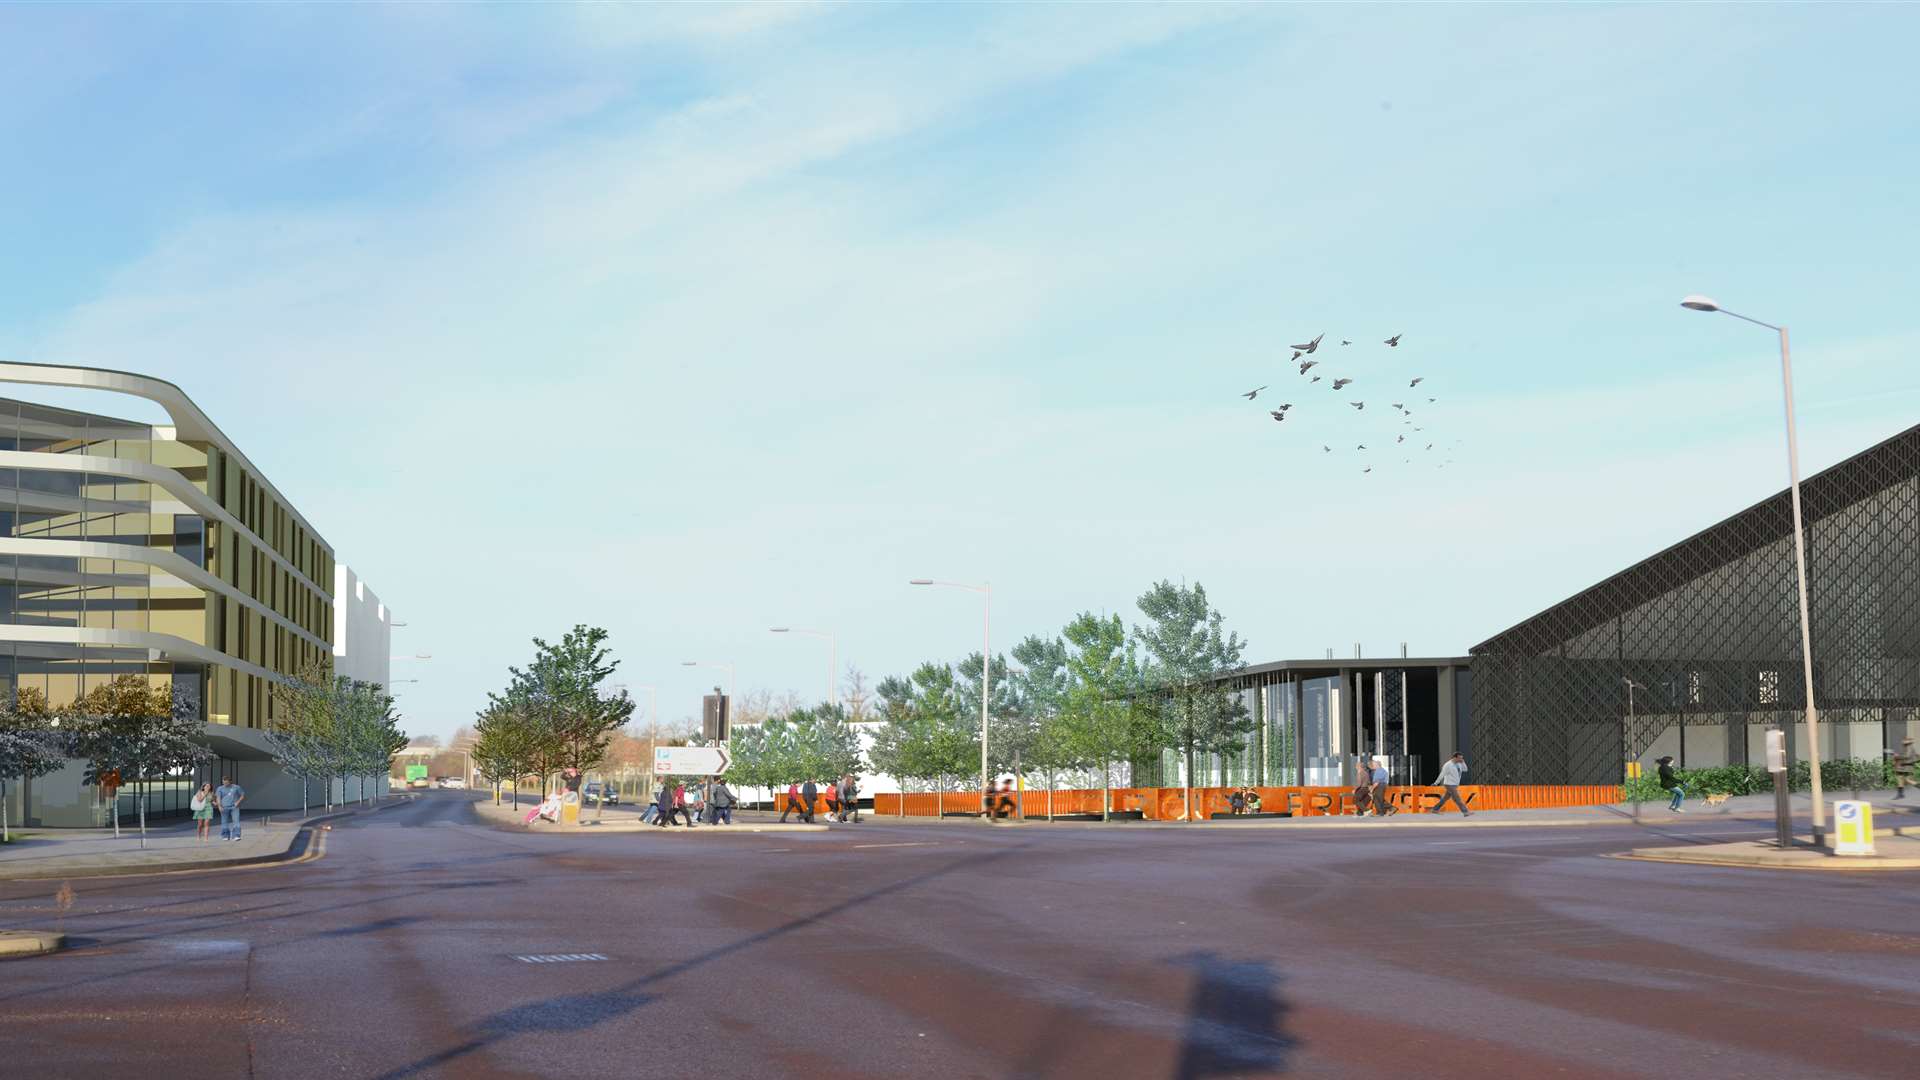 How Victoria Road will look once the development is completed